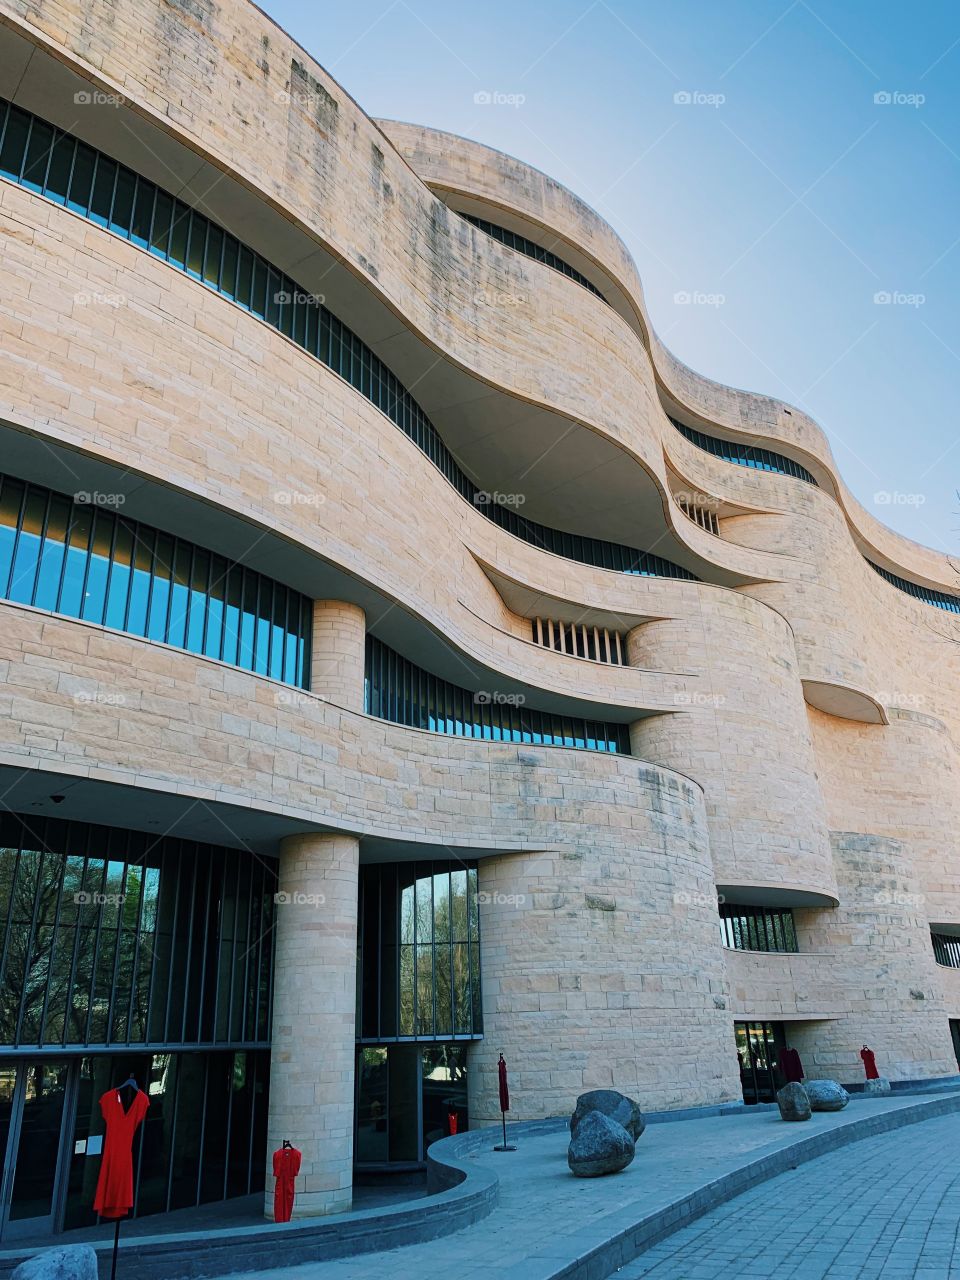 Undulating curves on the facade of the National Museum of the American Indian in Washington D.C.